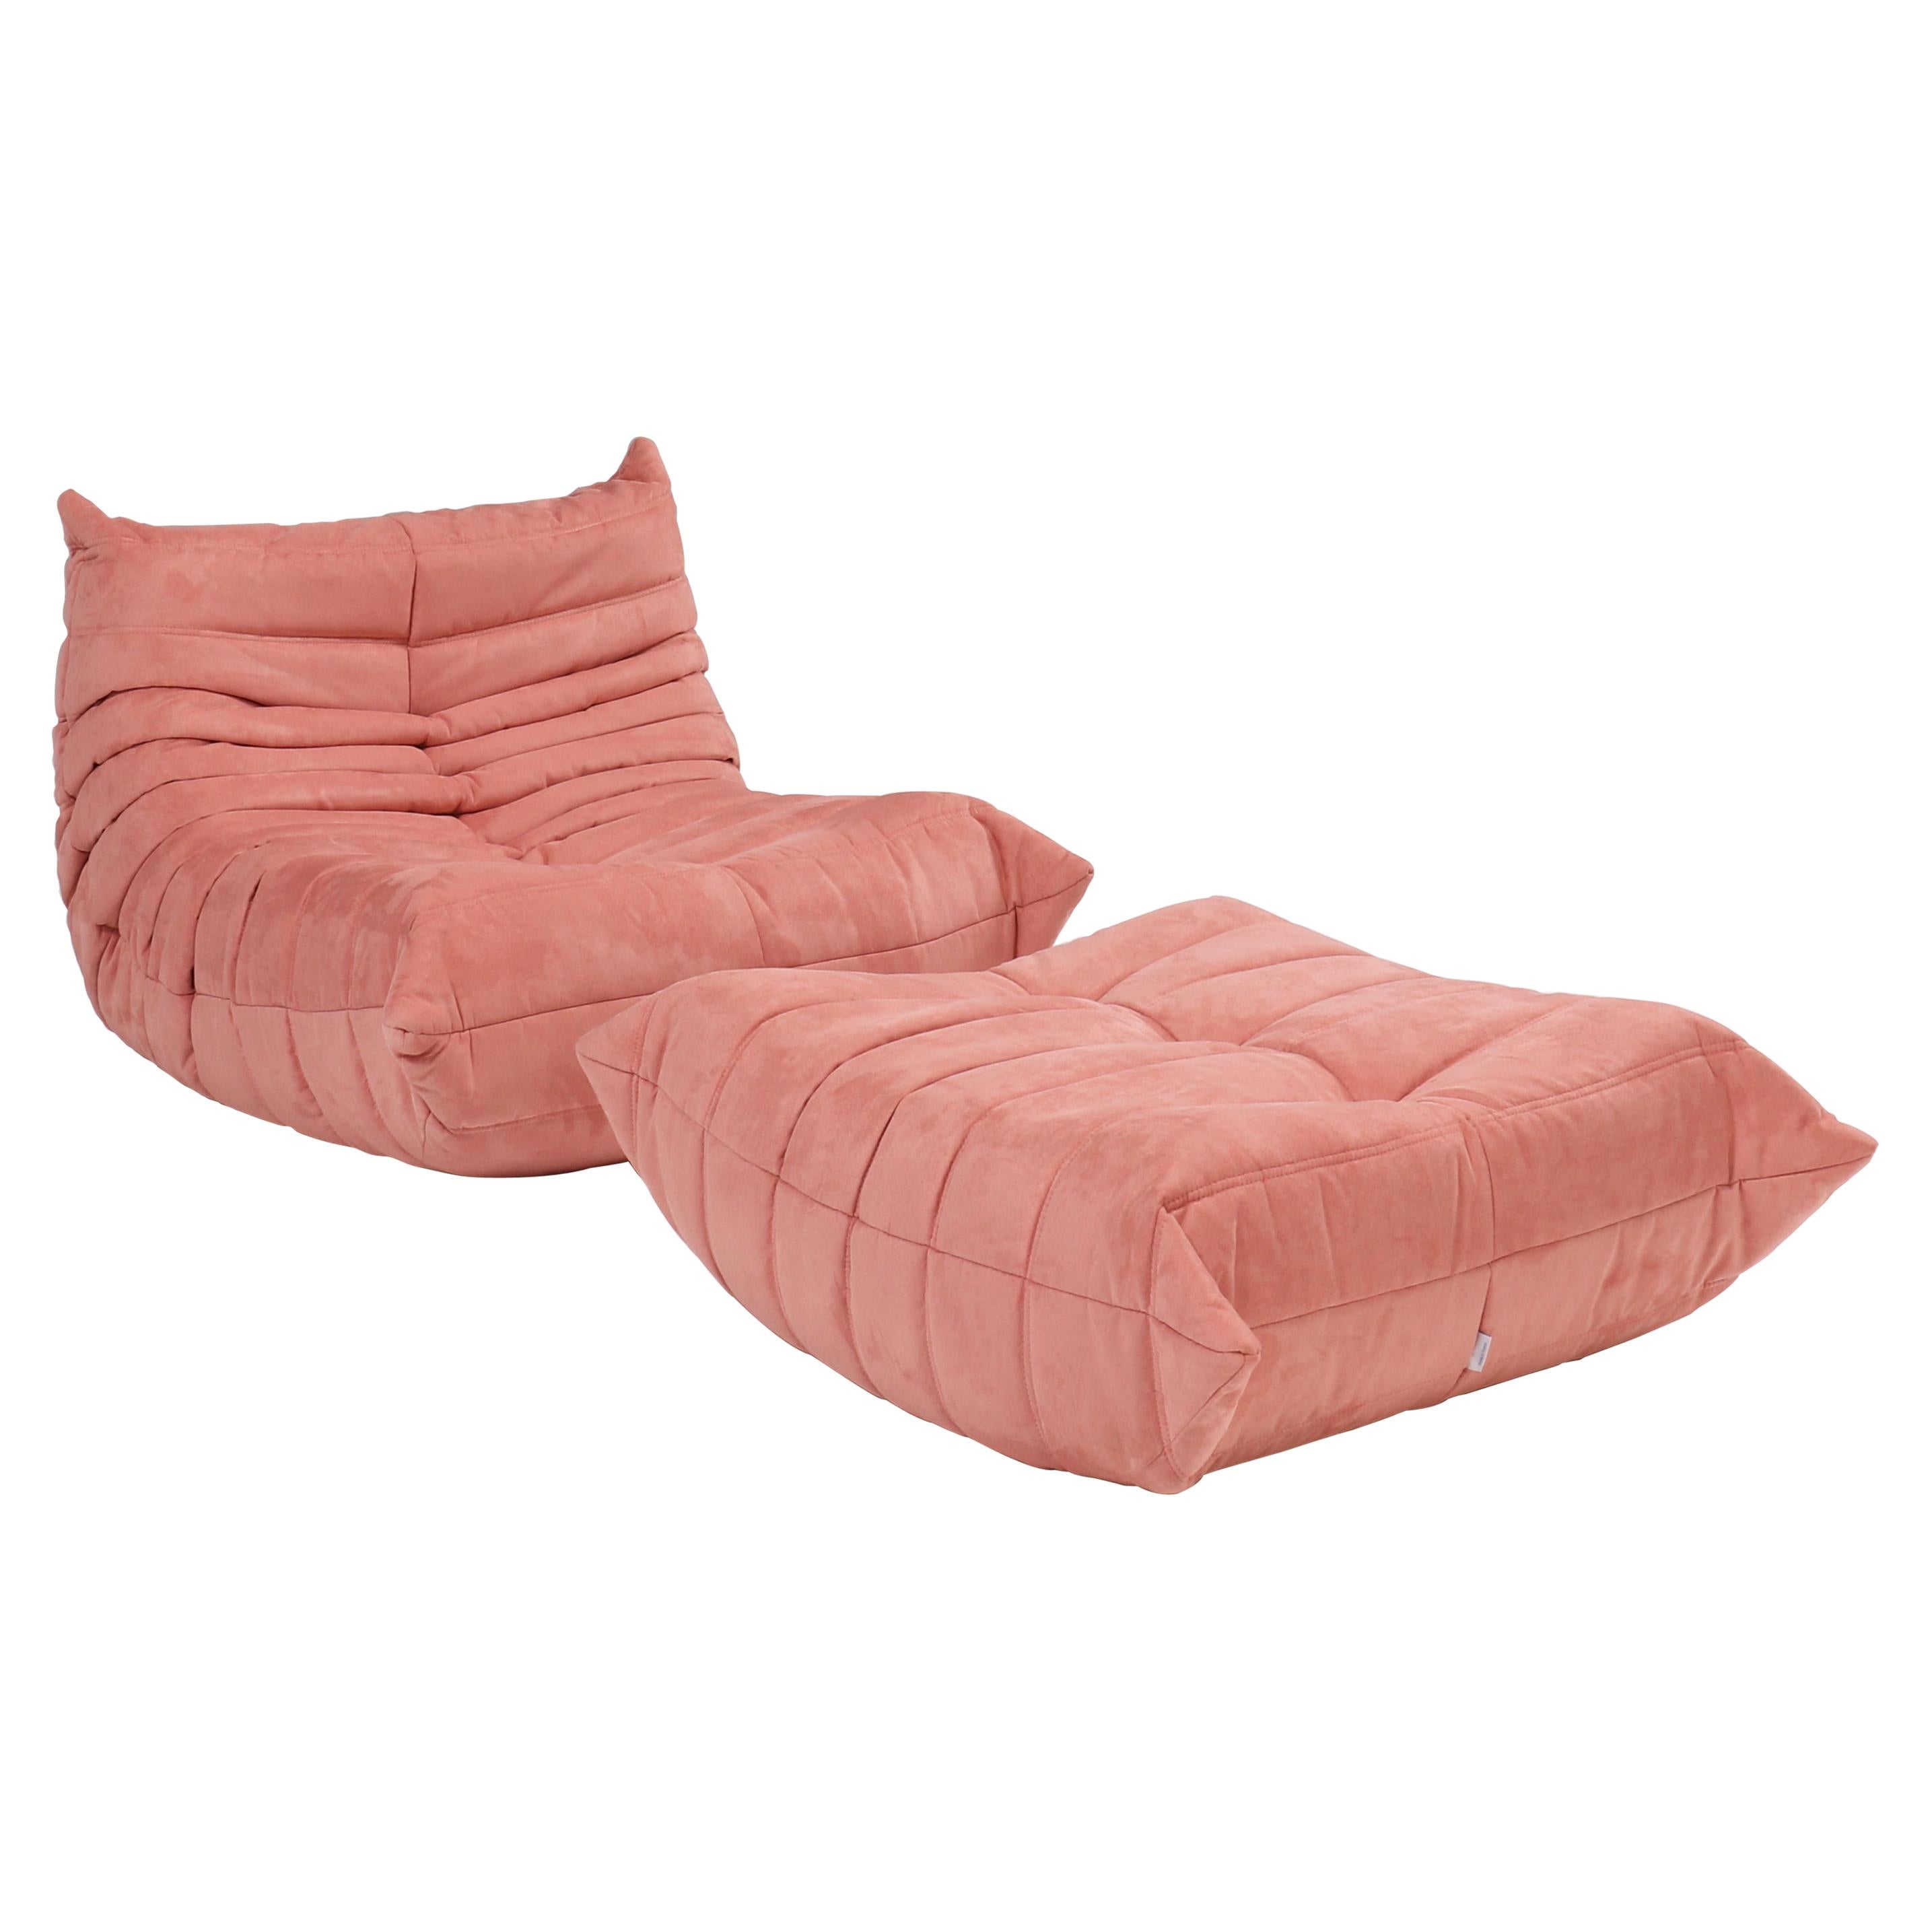 Ligne Roset by Michel Ducaroy Togo Pink Armchair and Footstool, Set of Two